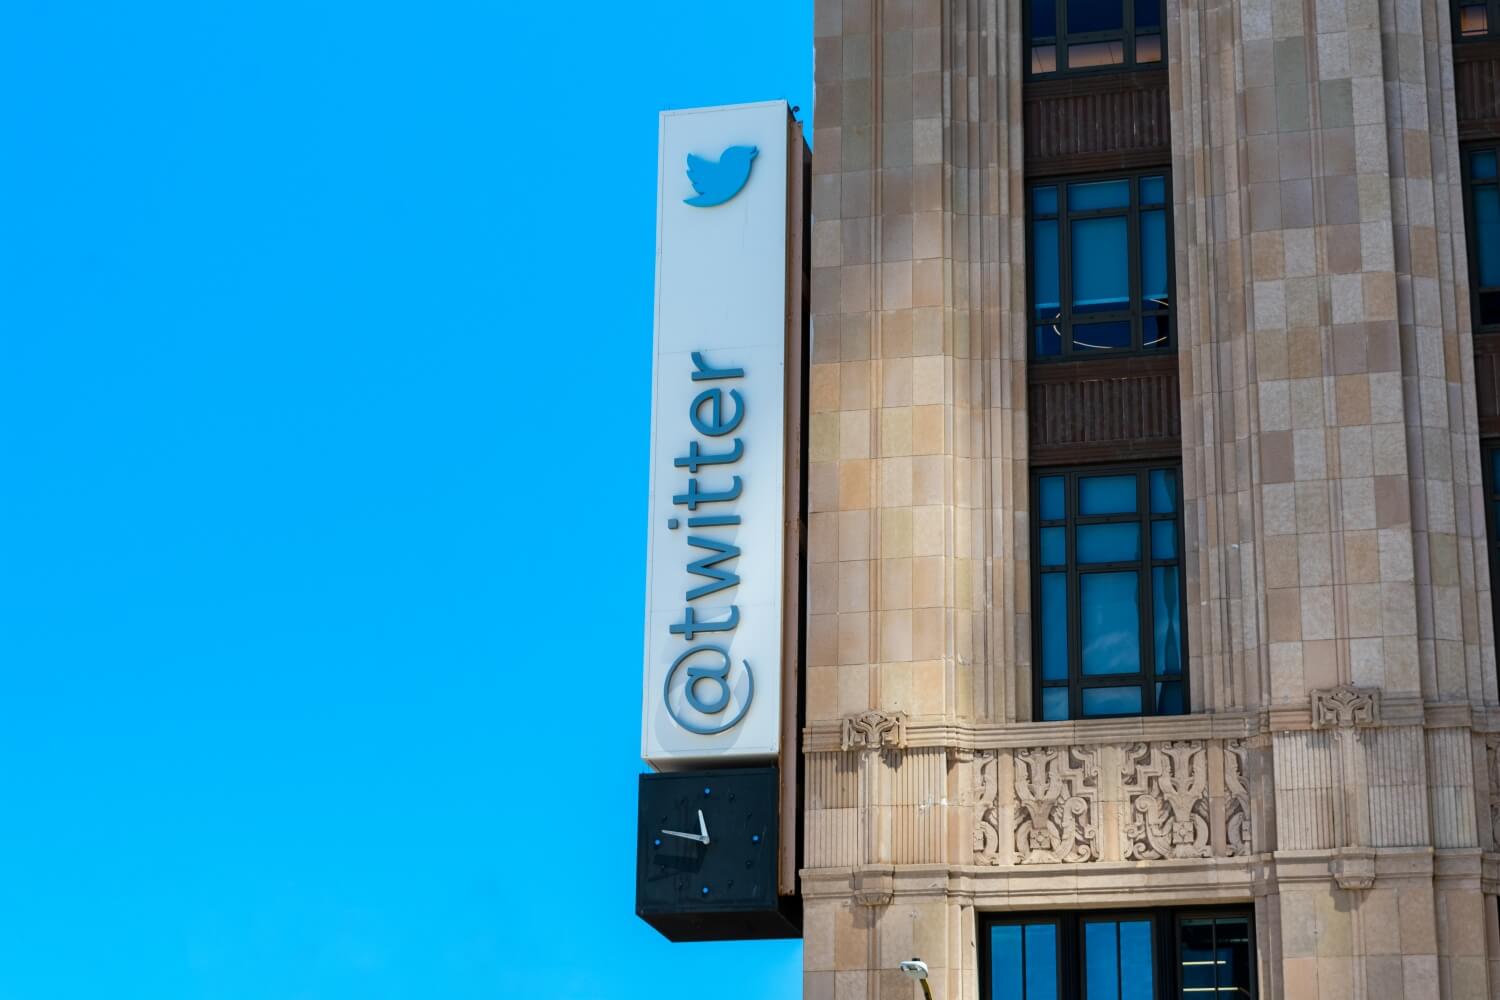 Twitter saw record growth in Q2 as the world stayed home